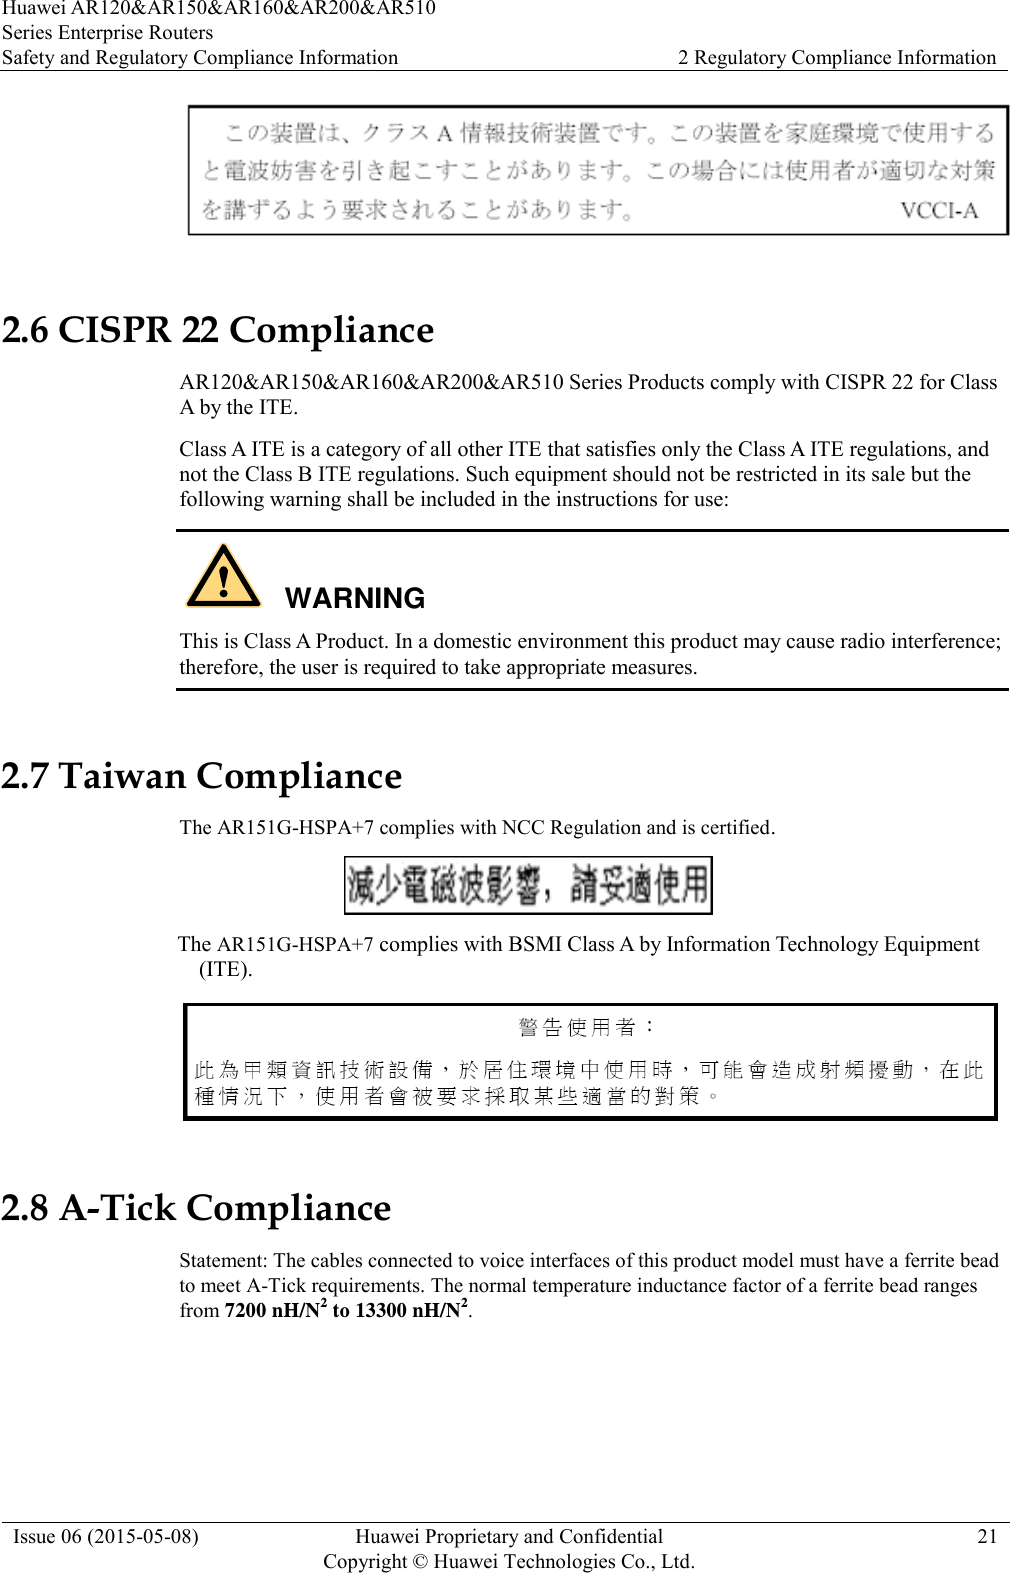 Huawei AR120&amp;AR150&amp;AR160&amp;AR200&amp;AR510 Series Enterprise Routers Safety and Regulatory Compliance Information 2 Regulatory Compliance Information  Issue 06 (2015-05-08) Huawei Proprietary and Confidential           Copyright © Huawei Technologies Co., Ltd. 21   2.6 CISPR 22 Compliance AR120&amp;AR150&amp;AR160&amp;AR200&amp;AR510 Series Products comply with CISPR 22 for Class A by the ITE.   Class A ITE is a category of all other ITE that satisfies only the Class A ITE regulations, and not the Class B ITE regulations. Such equipment should not be restricted in its sale but the following warning shall be included in the instructions for use:  This is Class A Product. In a domestic environment this product may cause radio interference; therefore, the user is required to take appropriate measures. 2.7 Taiwan Compliance The AR151G-HSPA+7 complies with NCC Regulation and is certified.                                                    The AR151G-HSPA+7 complies with BSMI Class A by Information Technology Equipment (ITE).                   2.8 A-Tick Compliance Statement: The cables connected to voice interfaces of this product model must have a ferrite bead to meet A-Tick requirements. The normal temperature inductance factor of a ferrite bead ranges from 7200 nH/N2 to 13300 nH/N2. WARNING